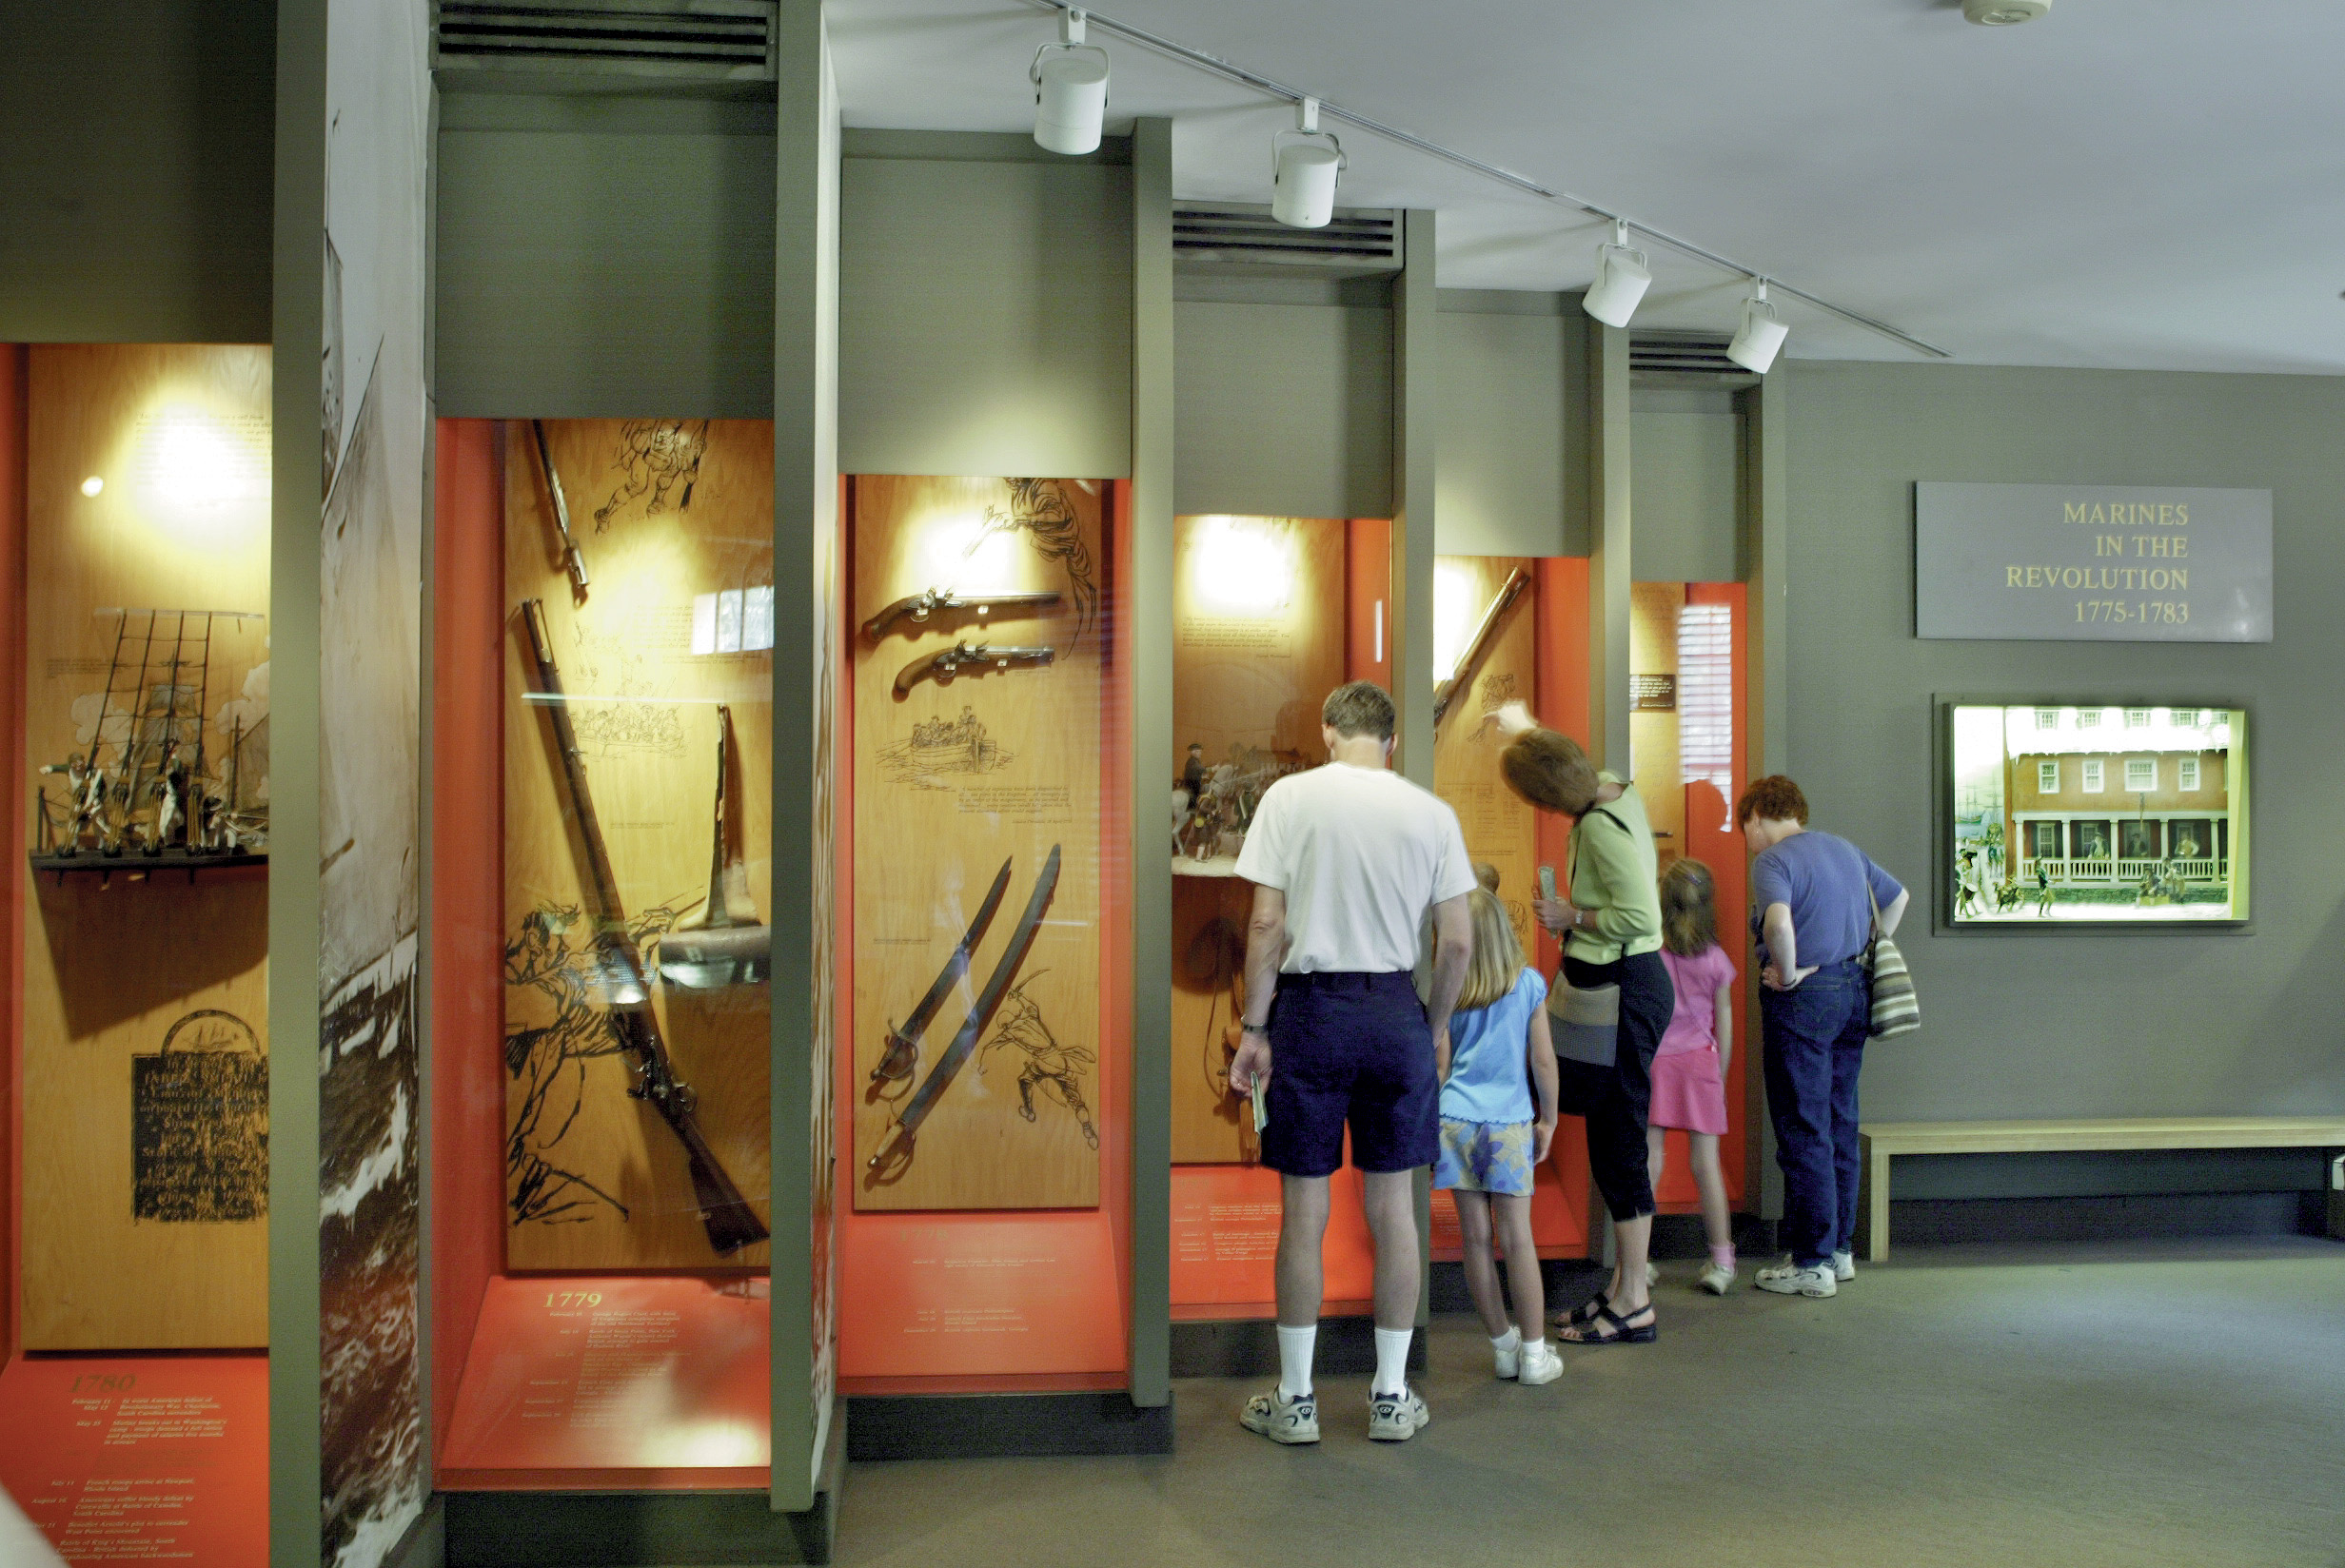 Weapons, models, and artifacts are displayed at the New Hall Military Museum. 